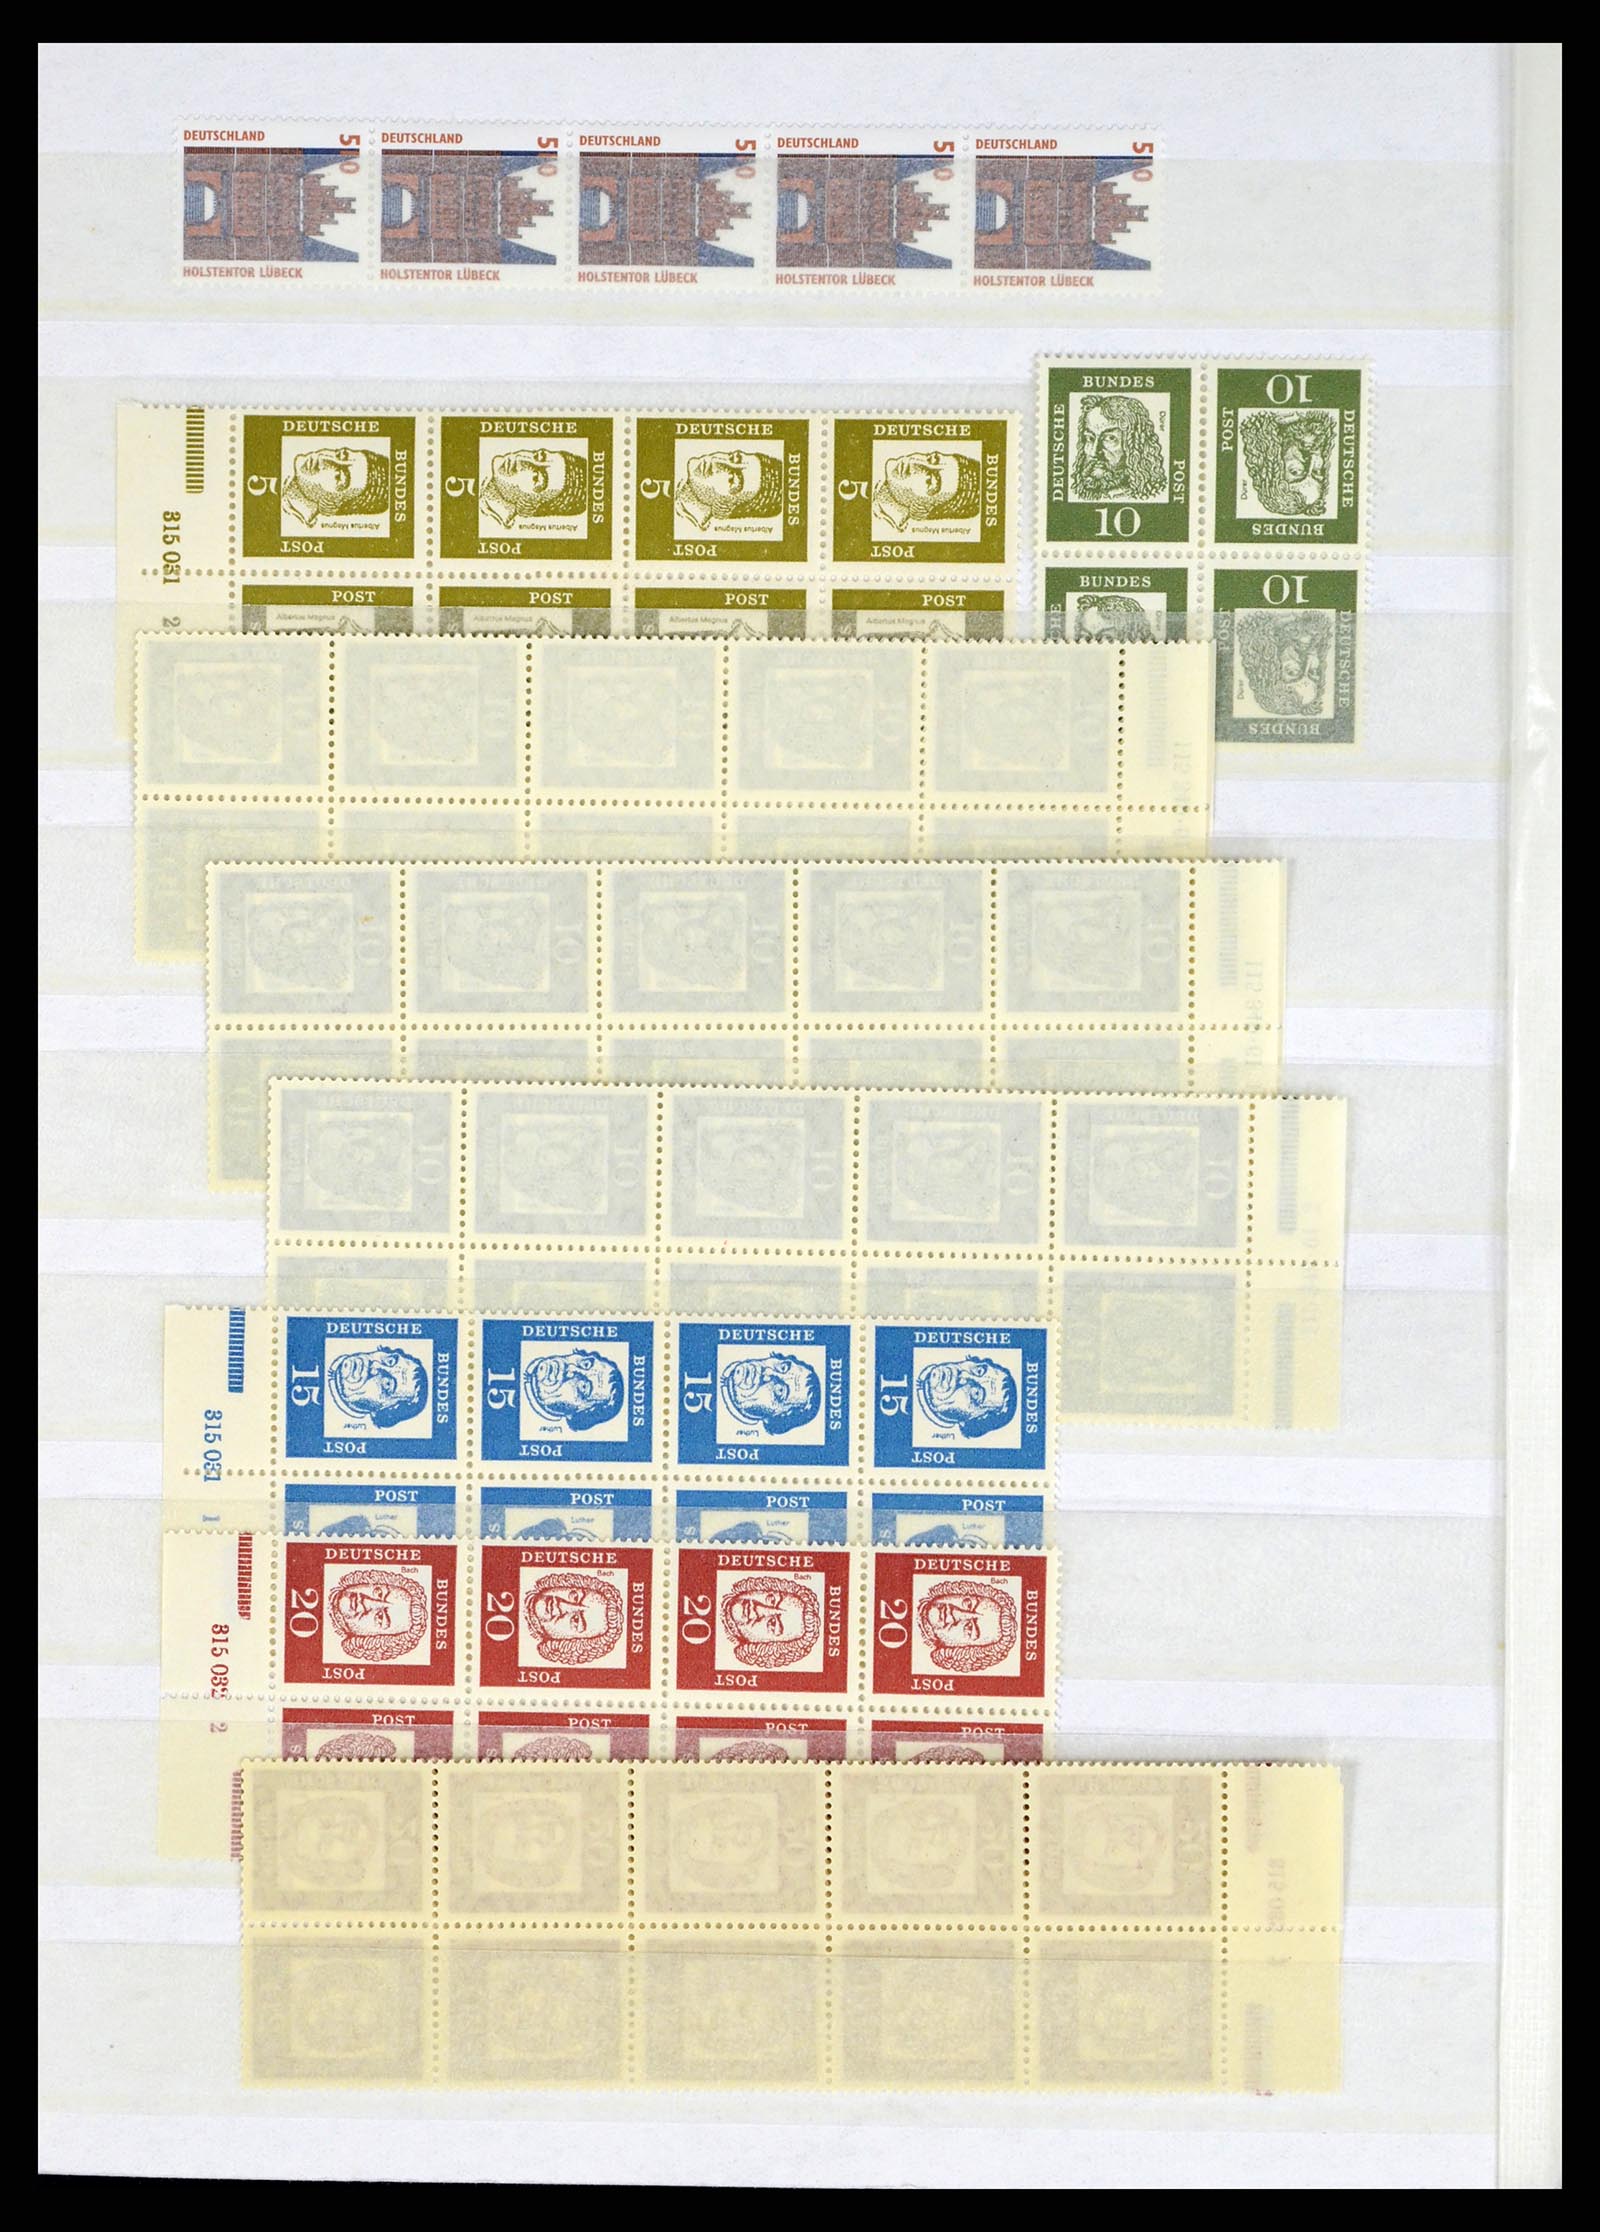 37354 078 - Stamp collection 37354 Bundespost and Berlin 1955-2000.